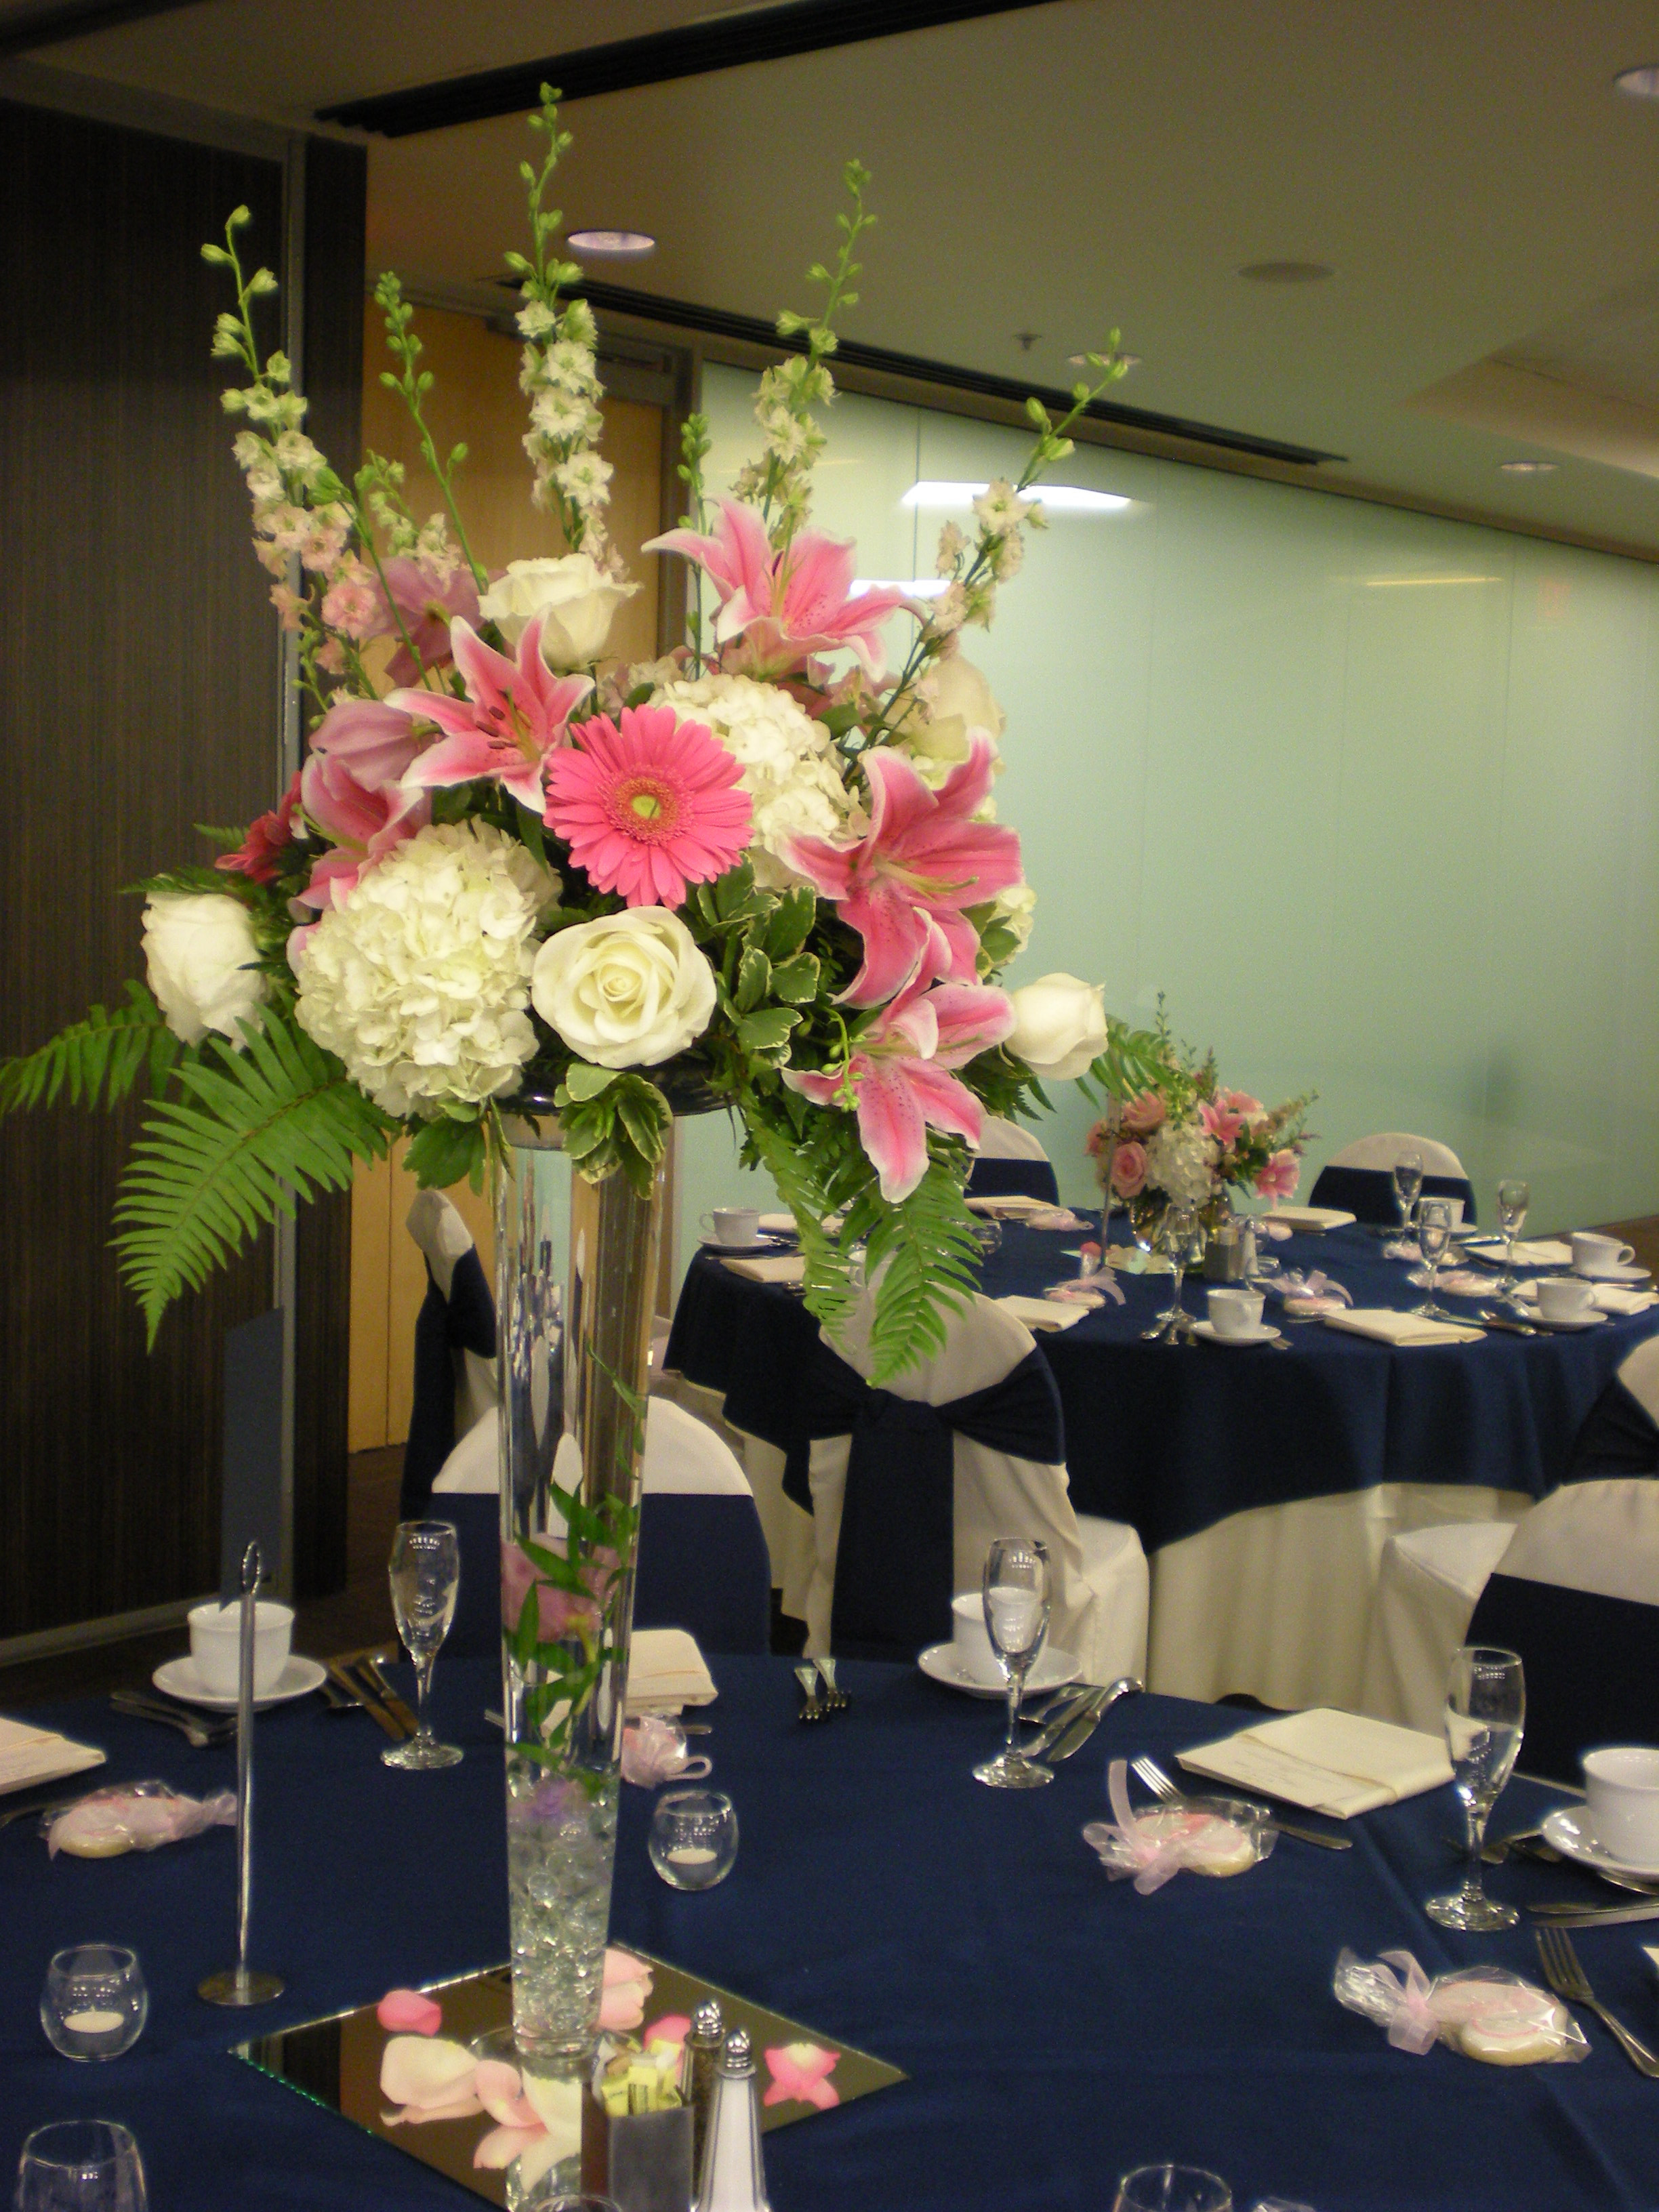 tall vases for wedding aisle of wedding flower arrangements tall vases flowers healthy pertaining to wedding flower vase arrangements simple tall vases with flowers for centerpieces and cellar image 2448